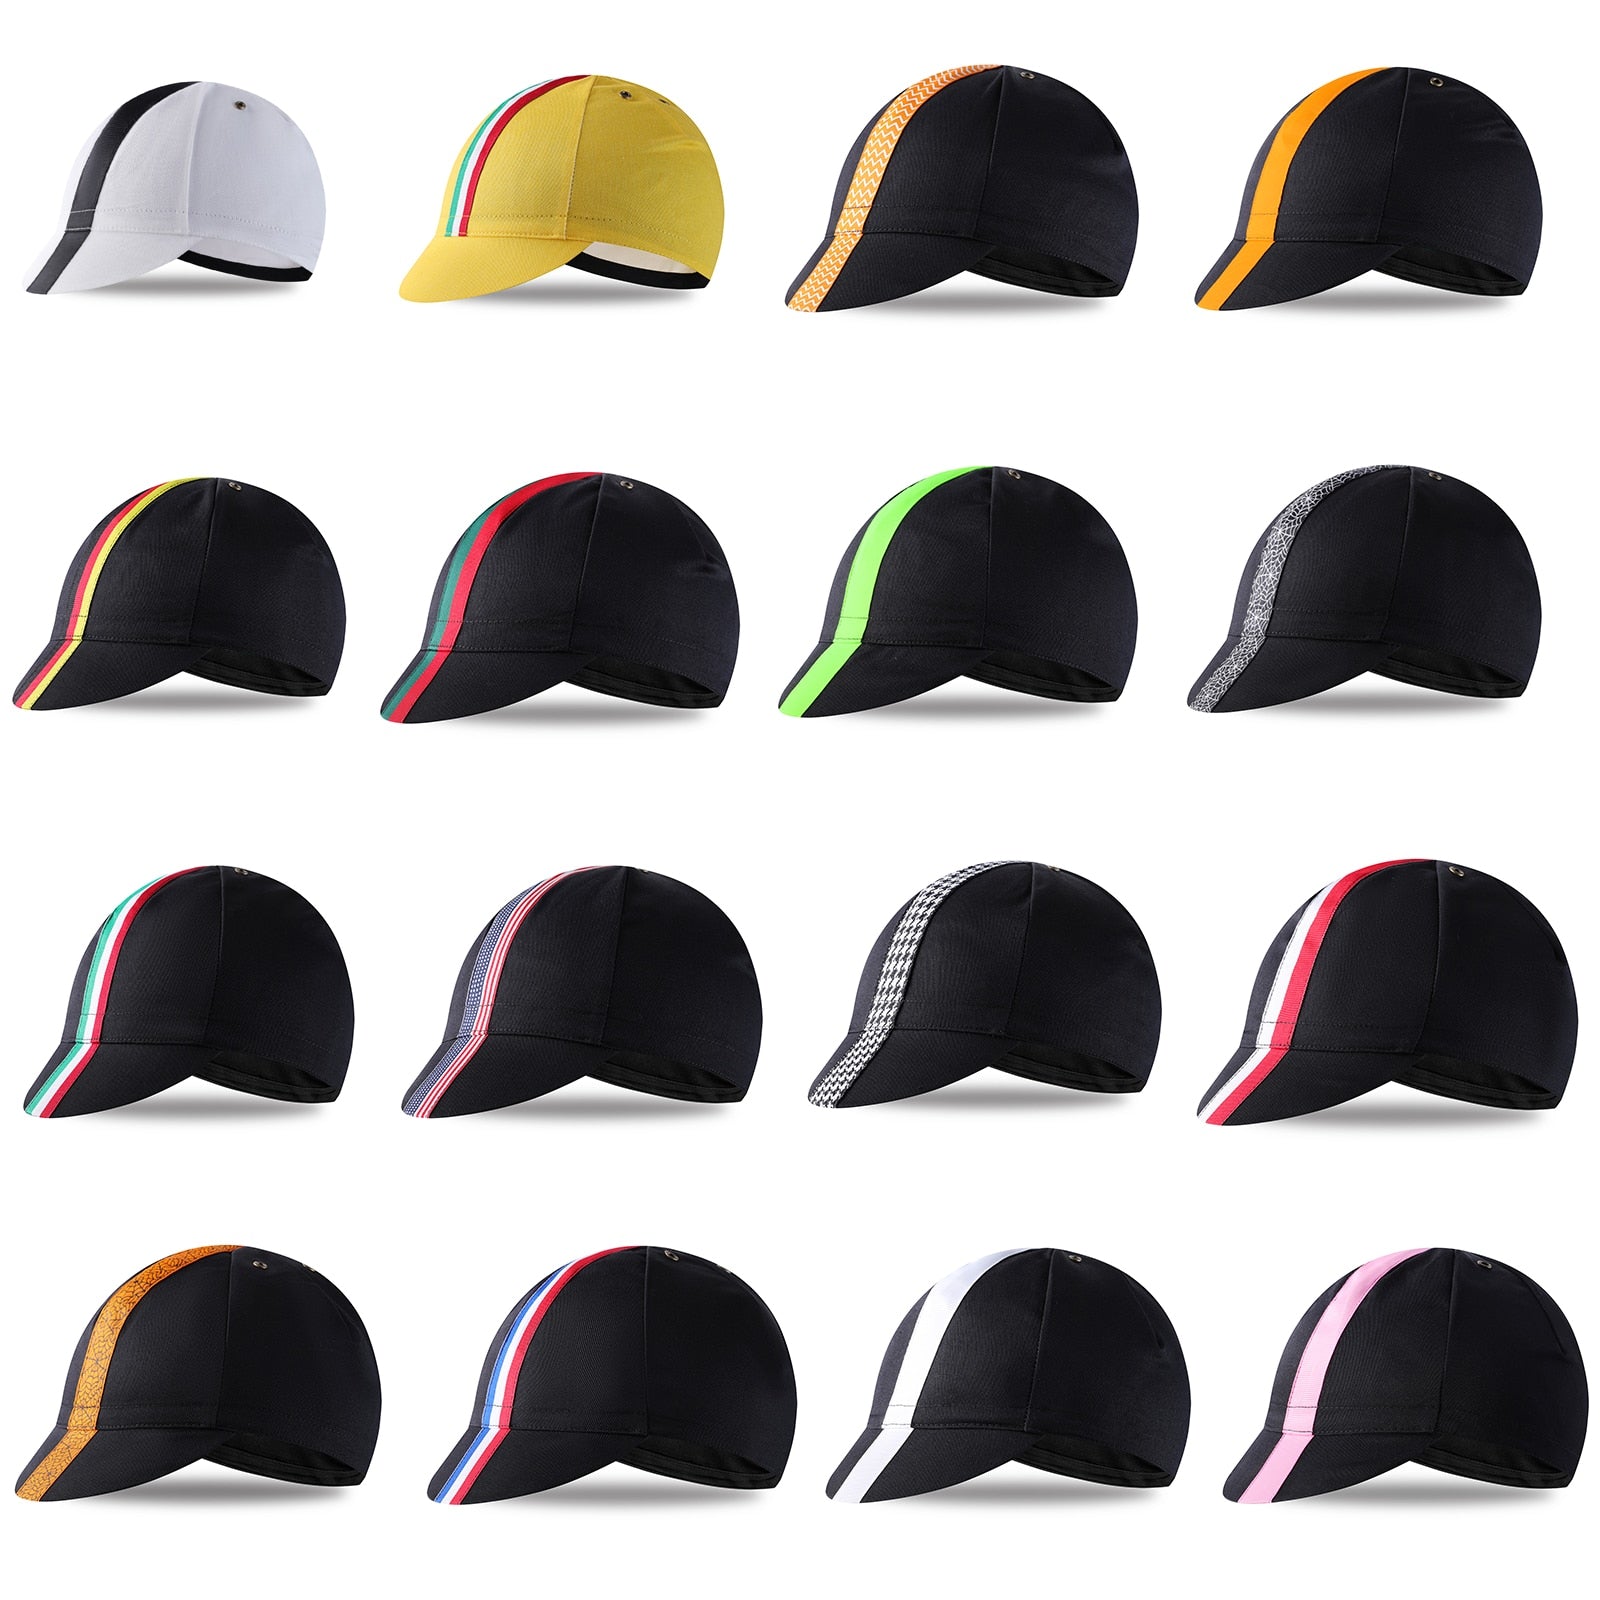 Black Cycling Cap - Cotton Cycling Hat-Under Helmet - Cycling Helmet Liner Breathable&Sweat Uptake One Size